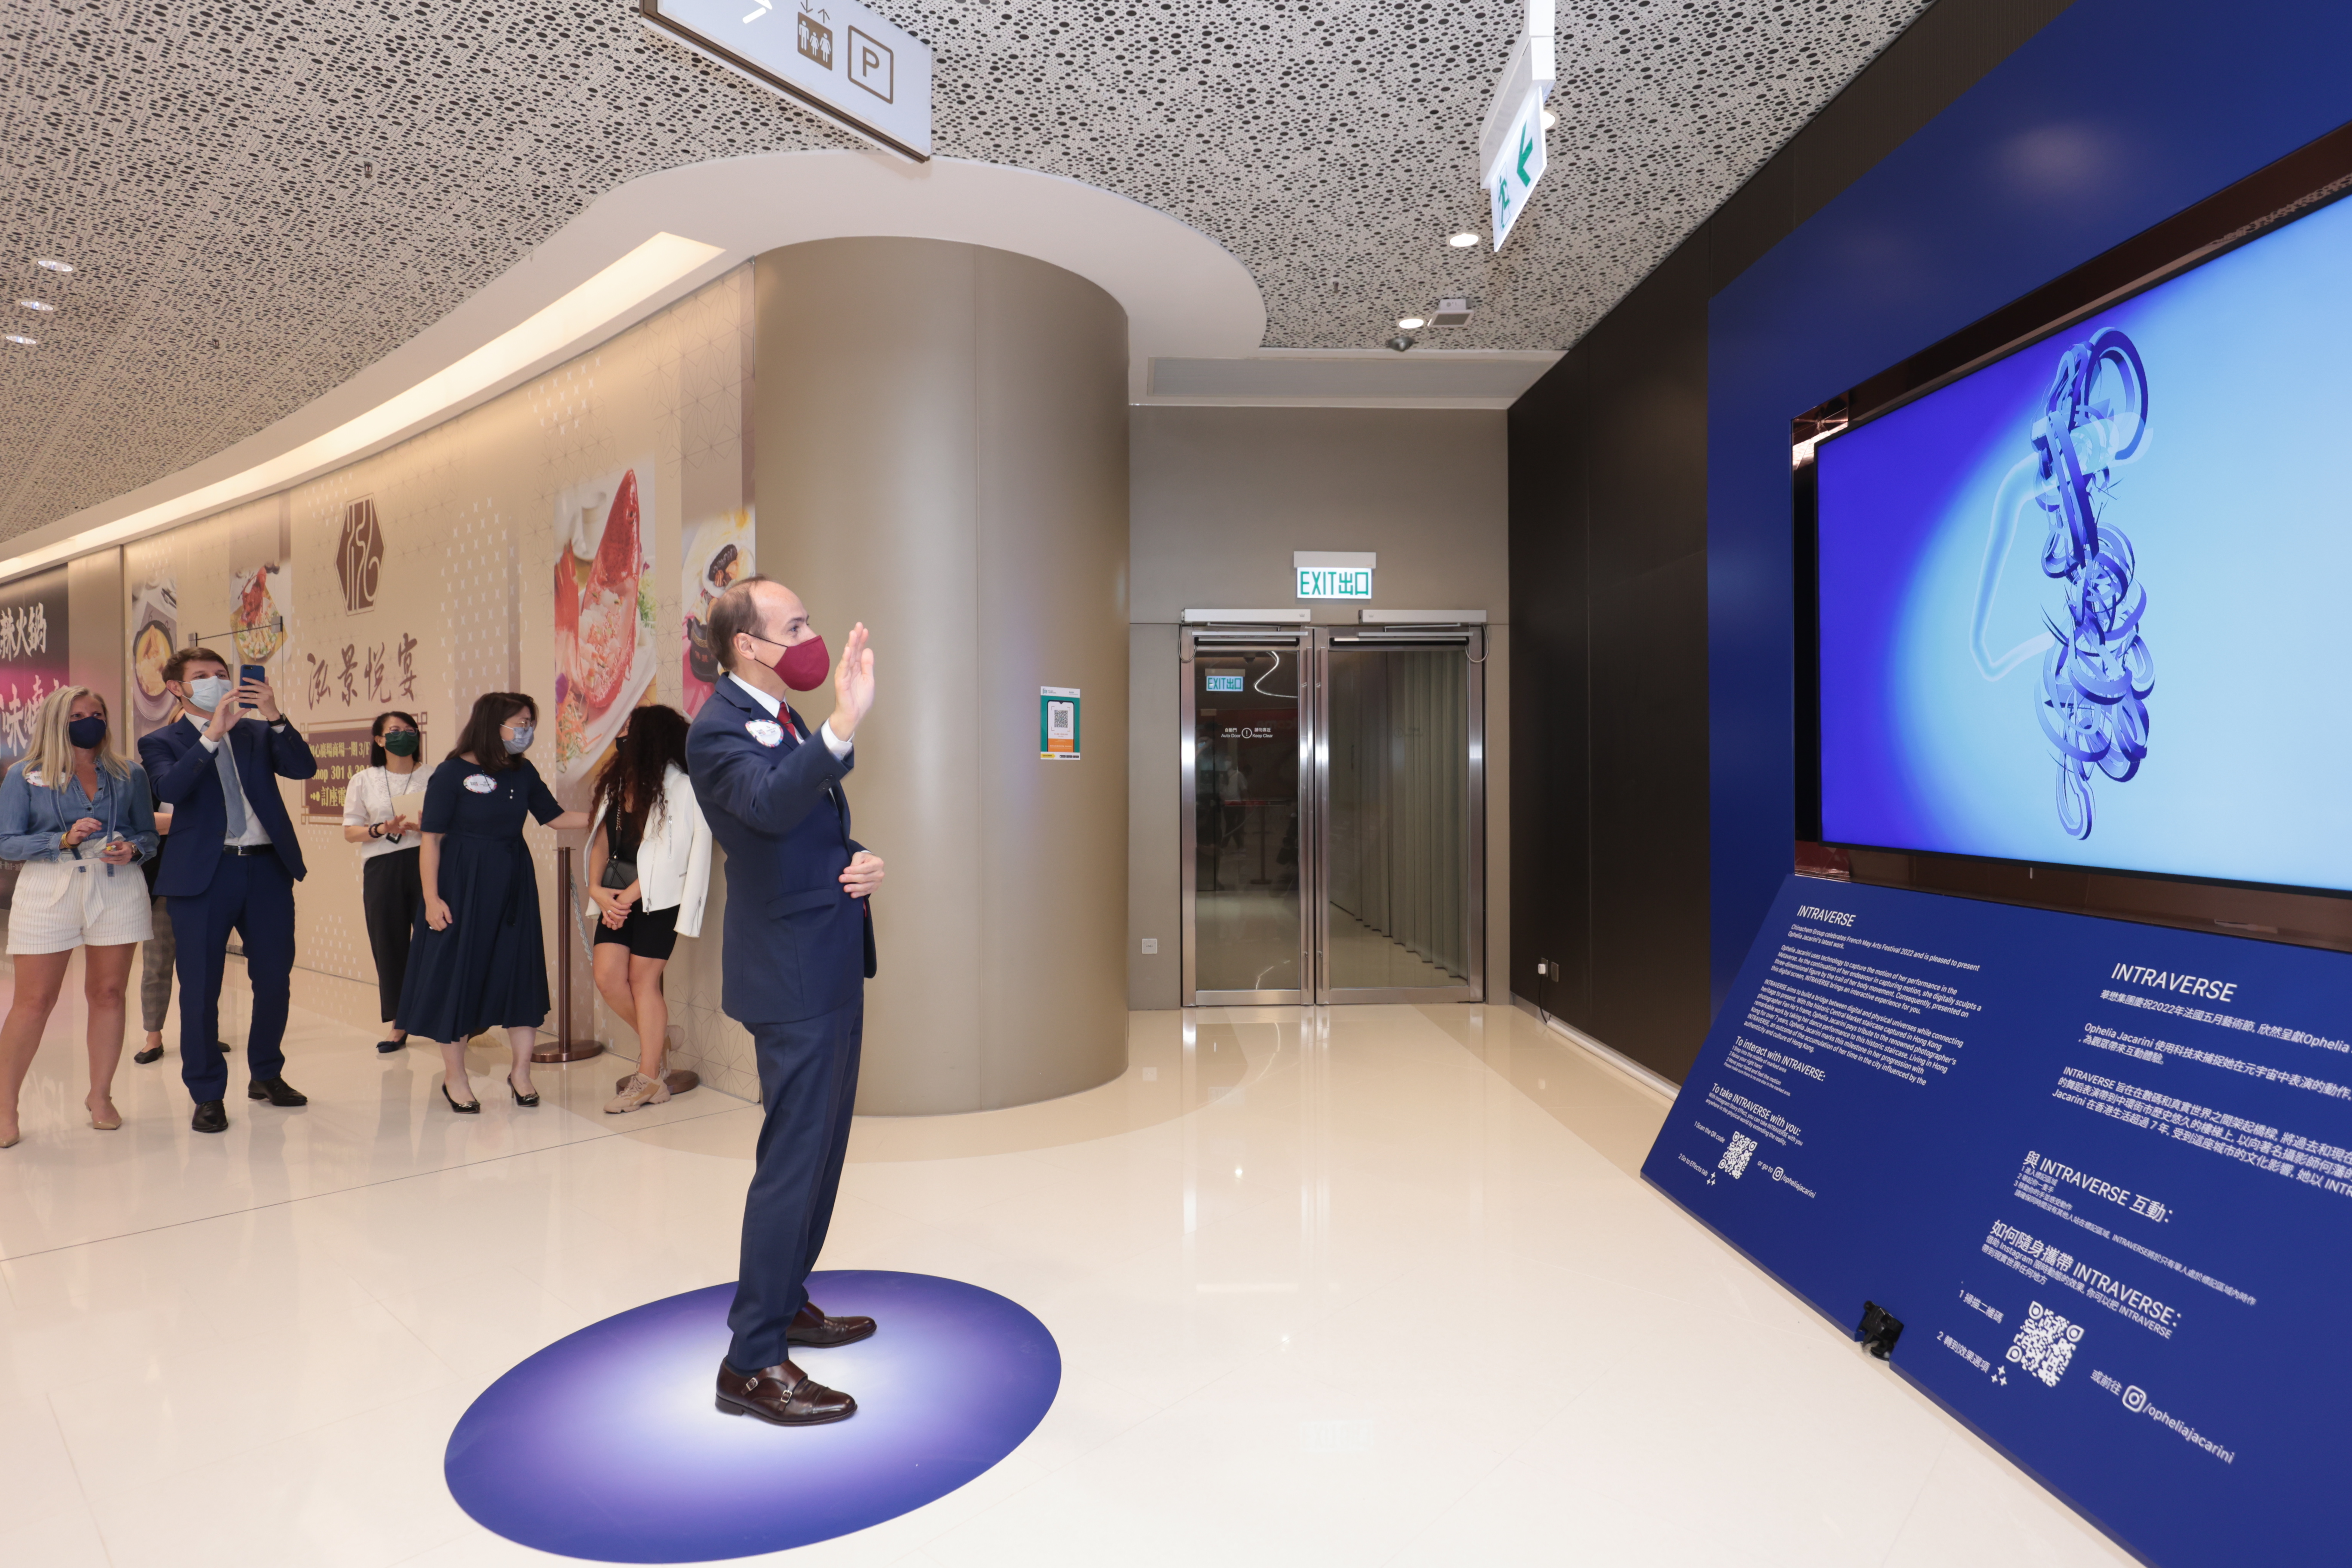 Guests try their hand on interacting with the fascinating digital art installation Intraverse.